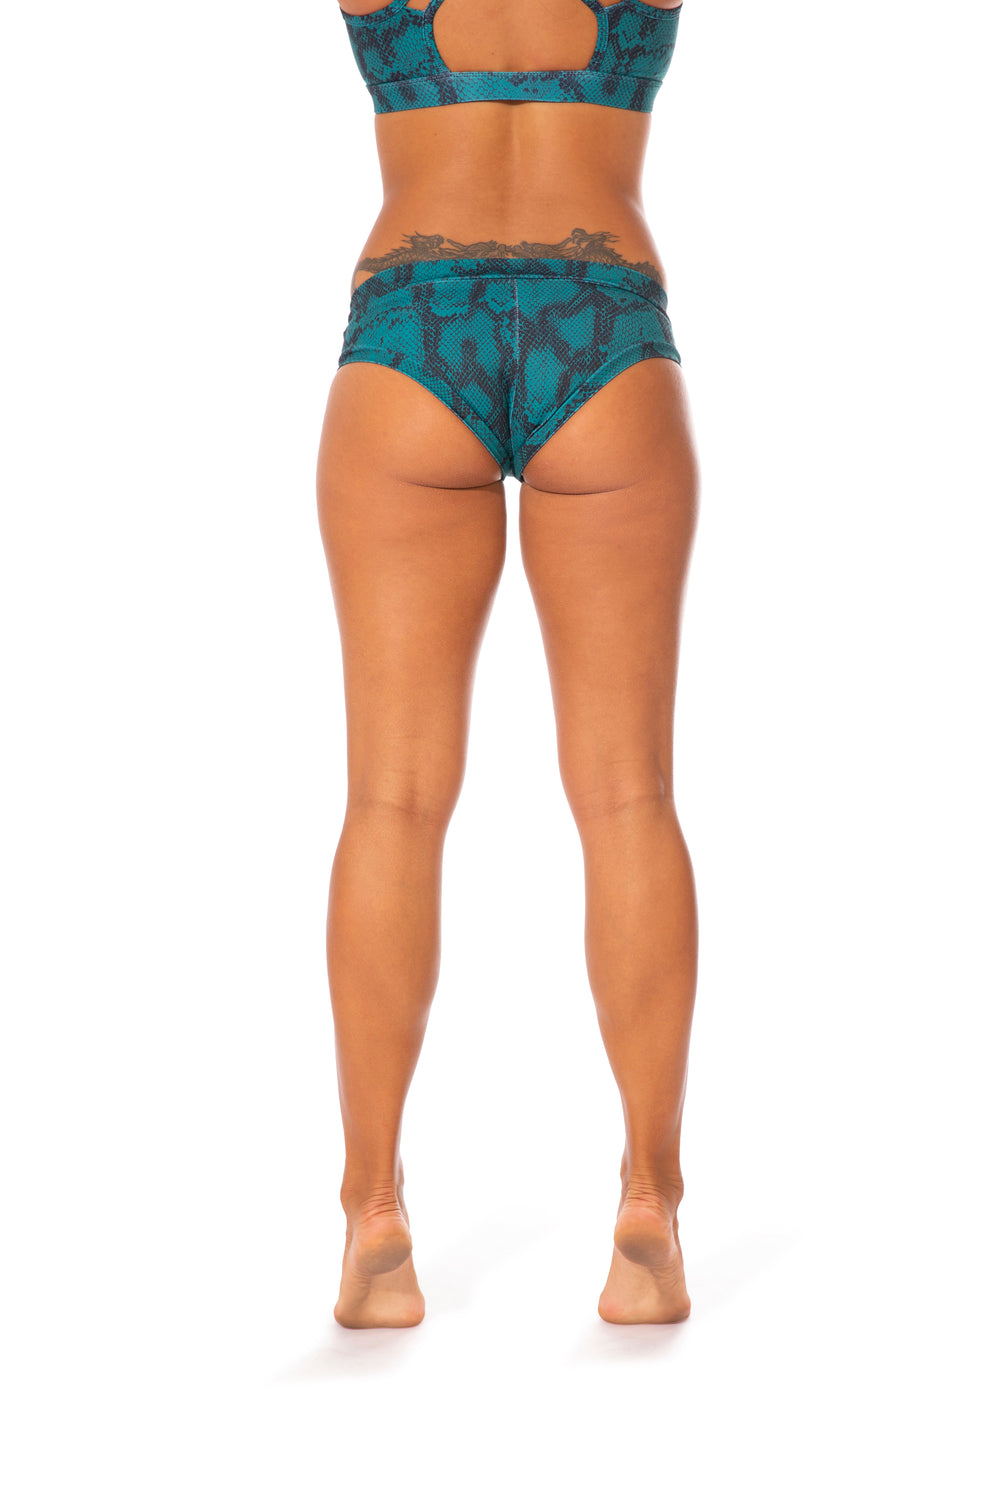 OFF THE POLE Classic Shorts - Emerald Green Snake Print *SIZE L ONLY*